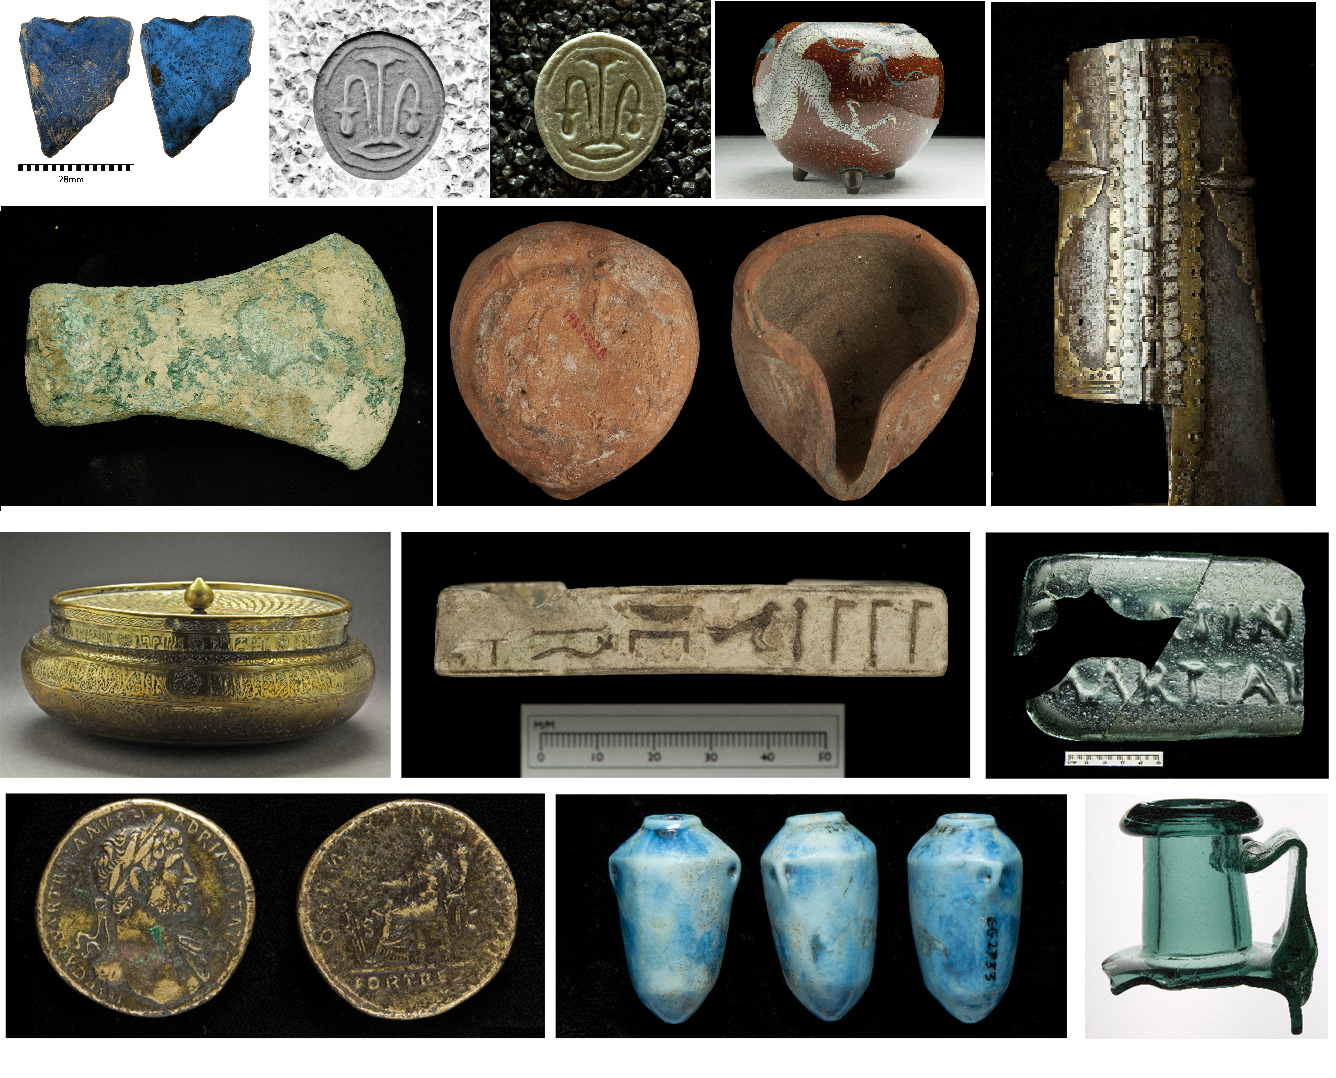 Collage of artefacts from the Museum & Artefact studies MA